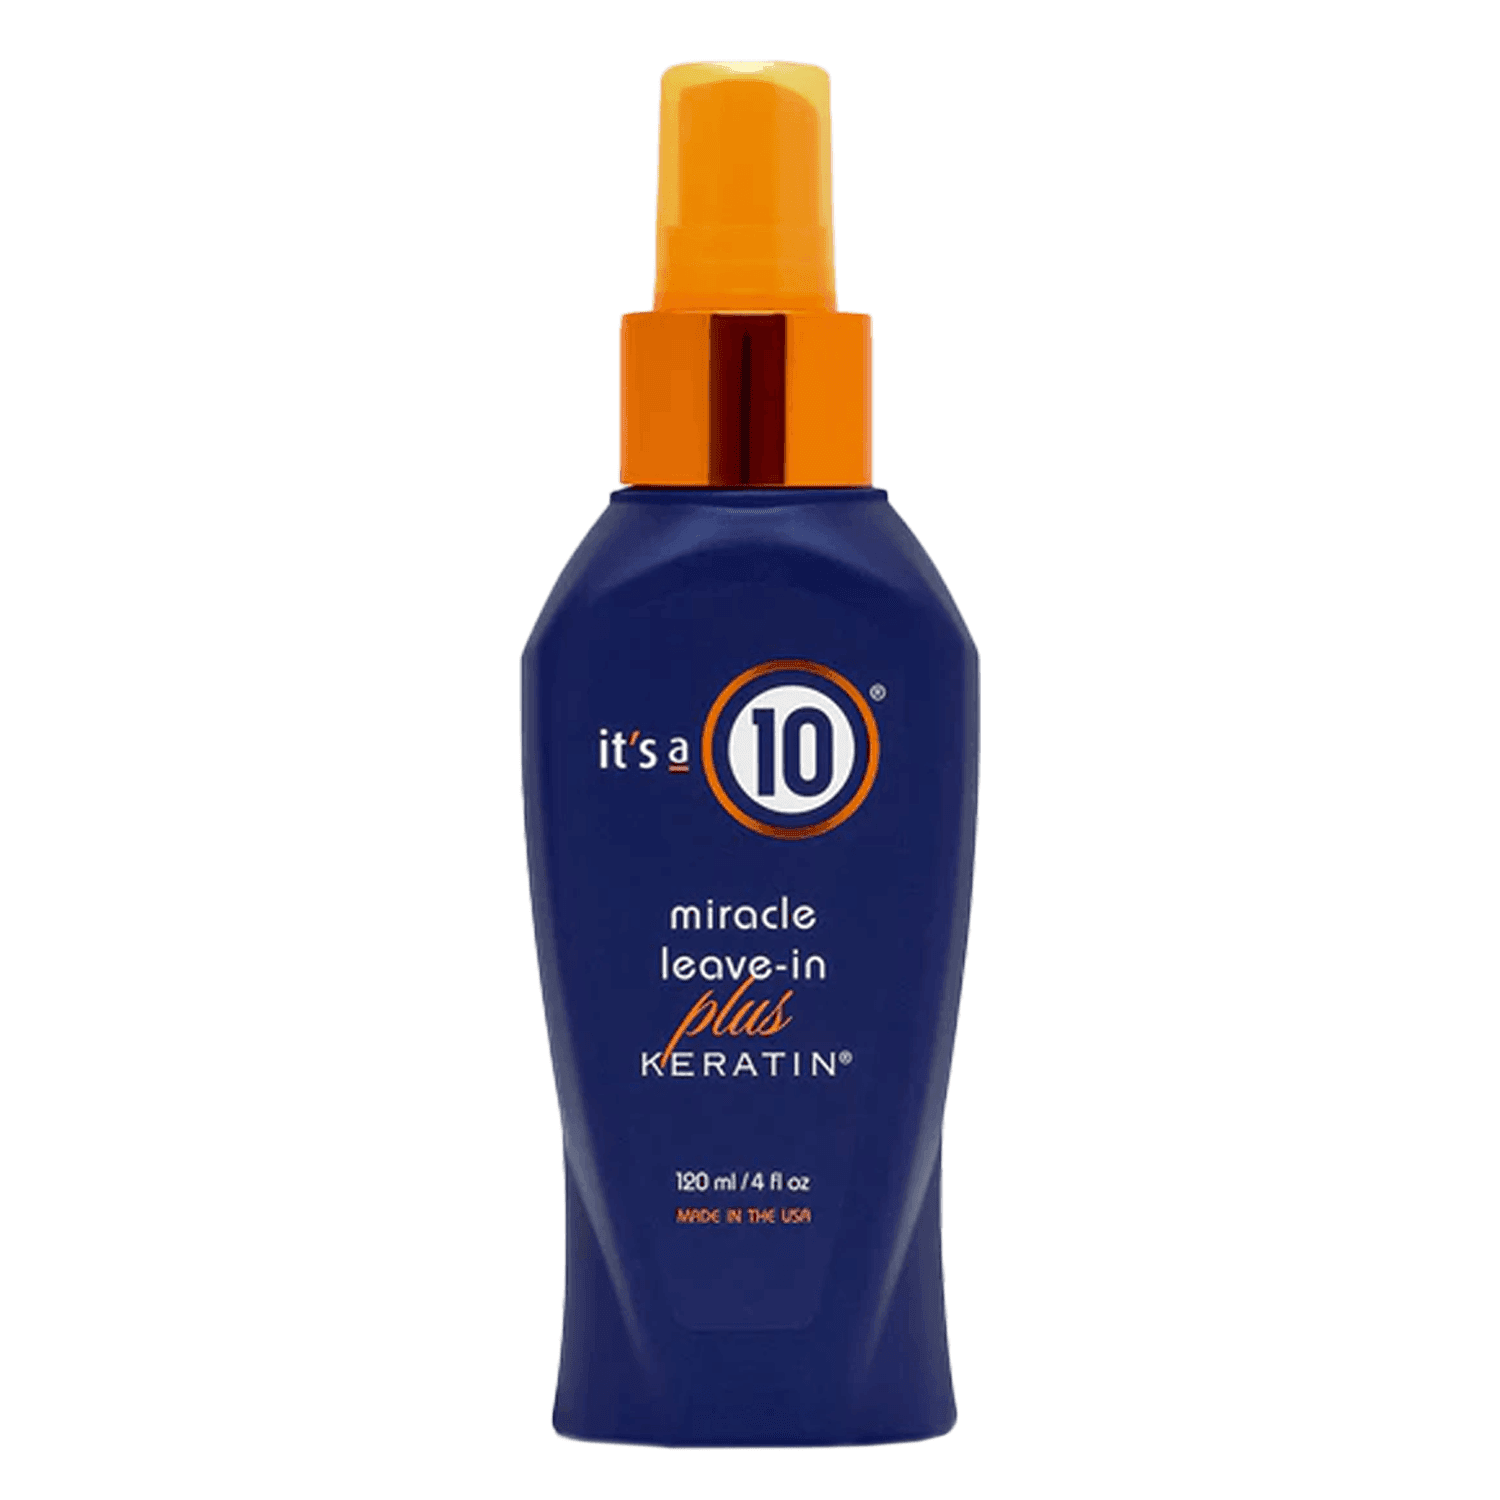 it's a 10 haircare - Miracle Leave-In Plus Keratin